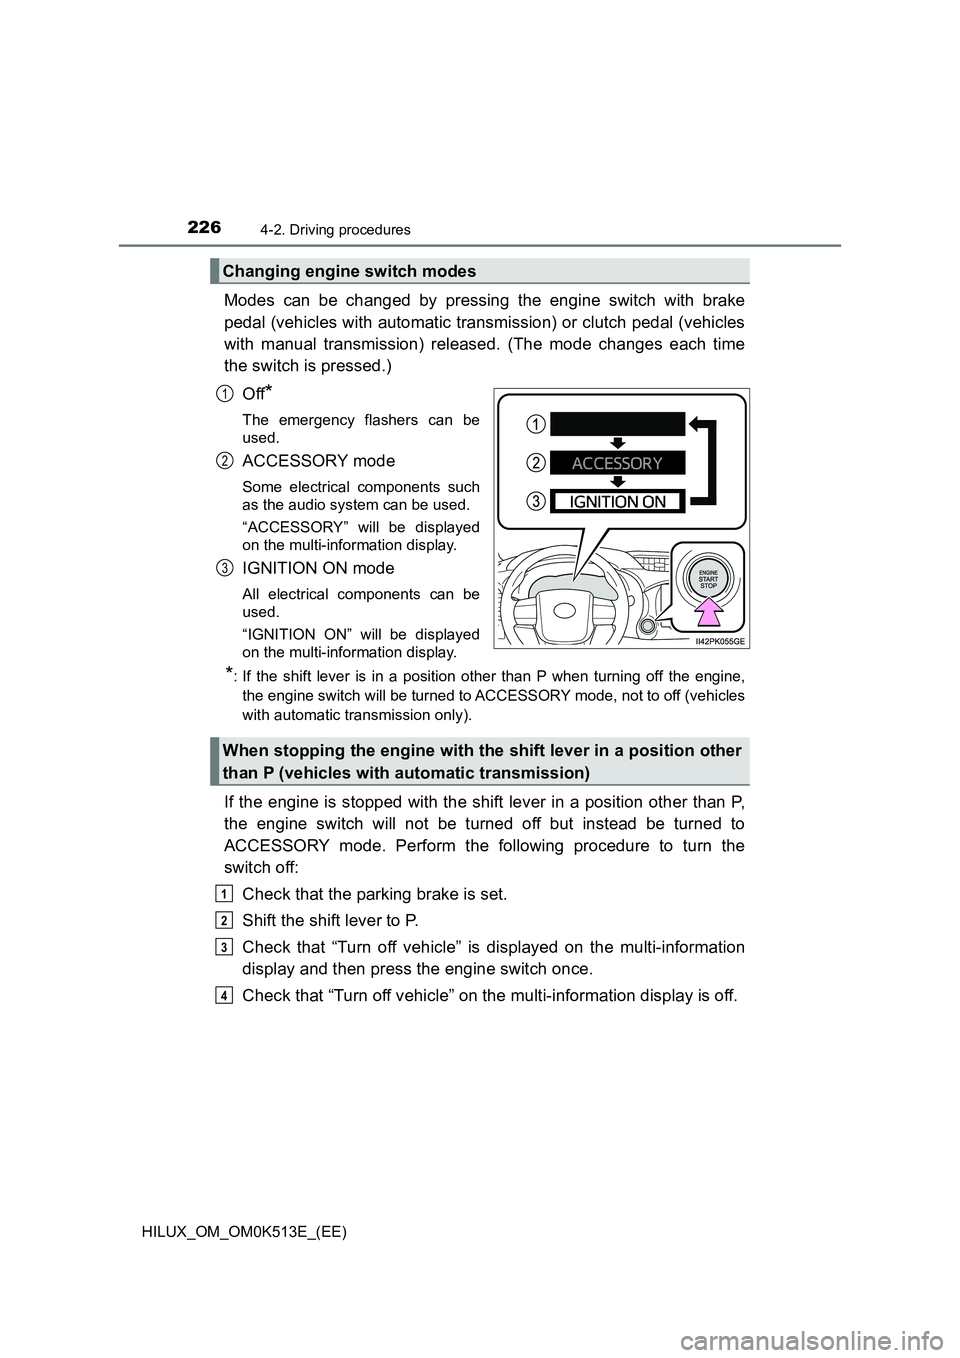 TOYOTA HILUX 2021  Owners Manual (in English) 2264-2. Driving procedures
HILUX_OM_OM0K513E_(EE)
Modes can be changed by pressing the engine switch with brake 
pedal (vehicles with automatic transmission) or clutch pedal (vehicles 
with manual tra